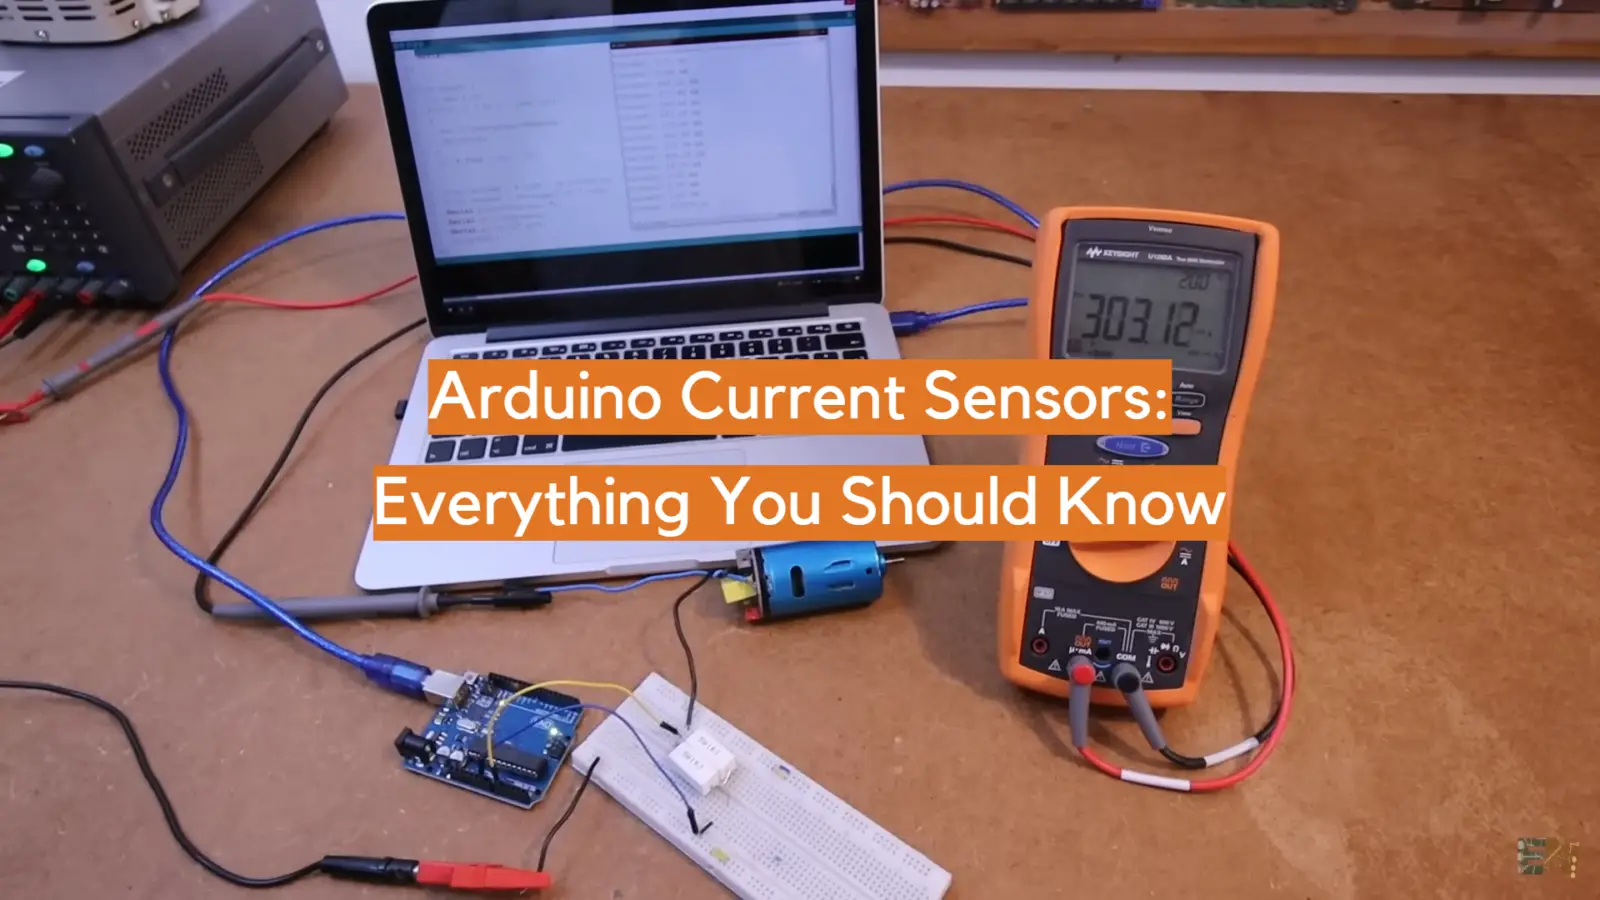 Arduino Current Sensors: Everything You Should Know